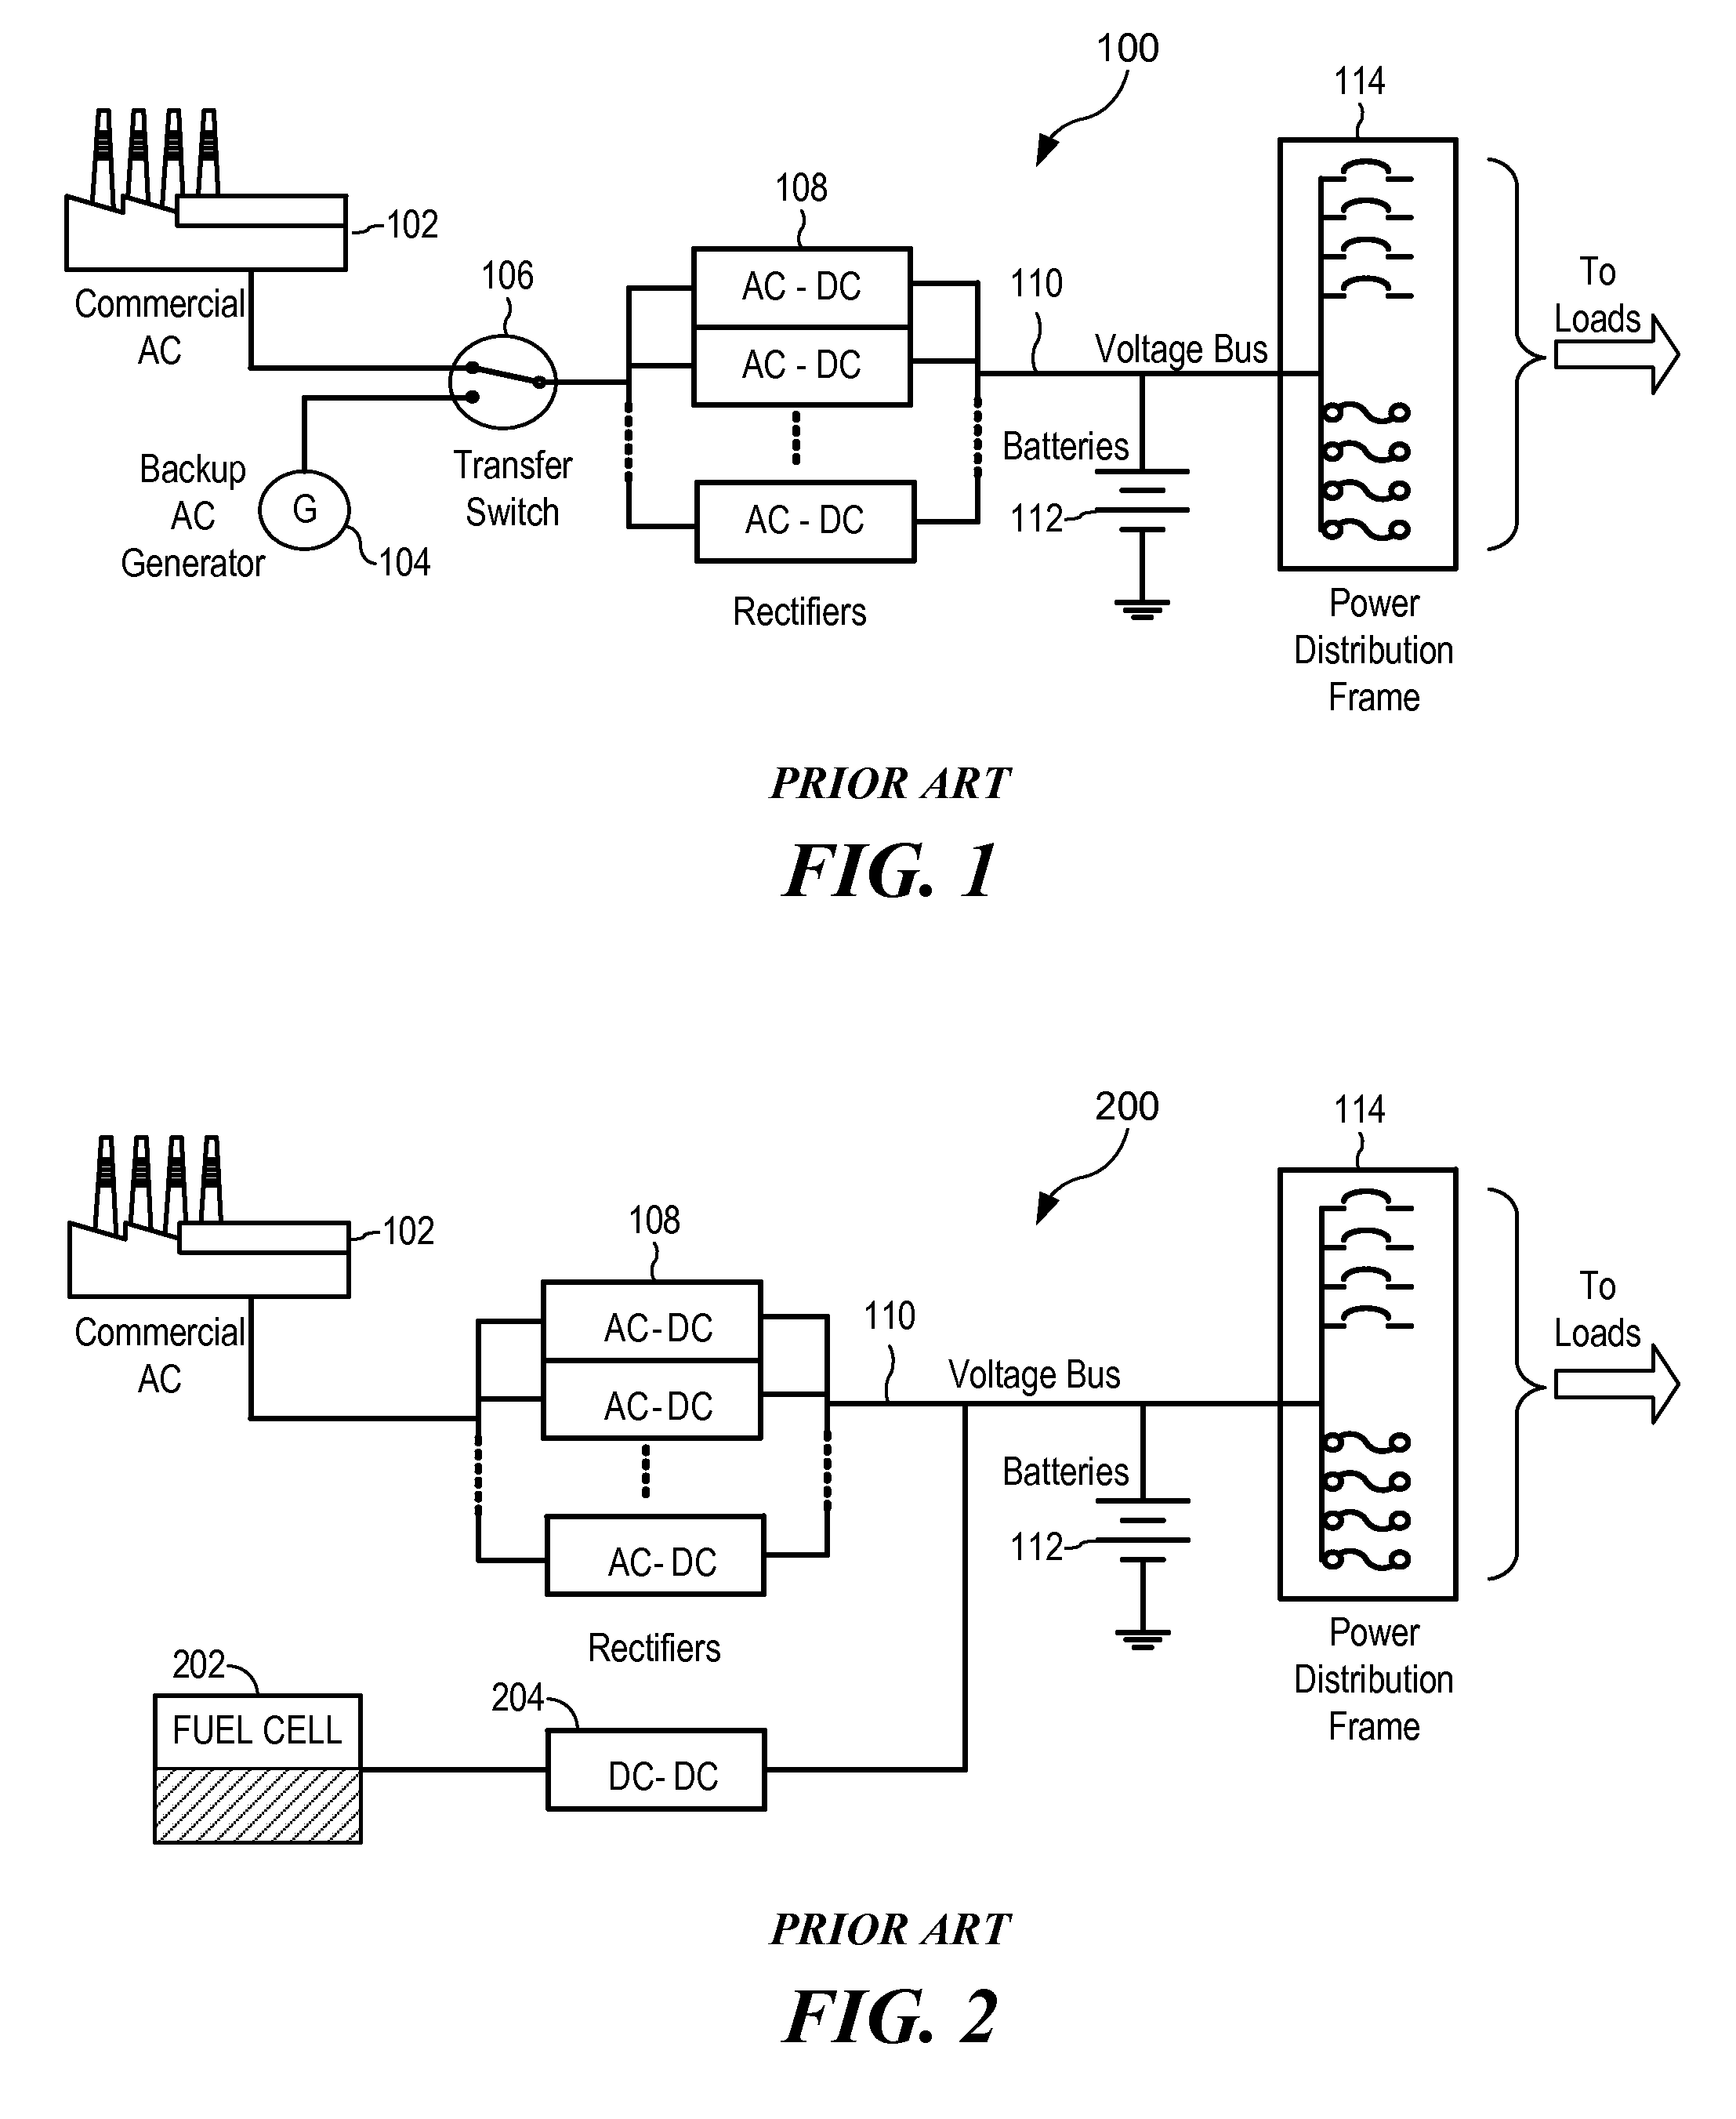 Integrated DC power system with one or more fuel cells